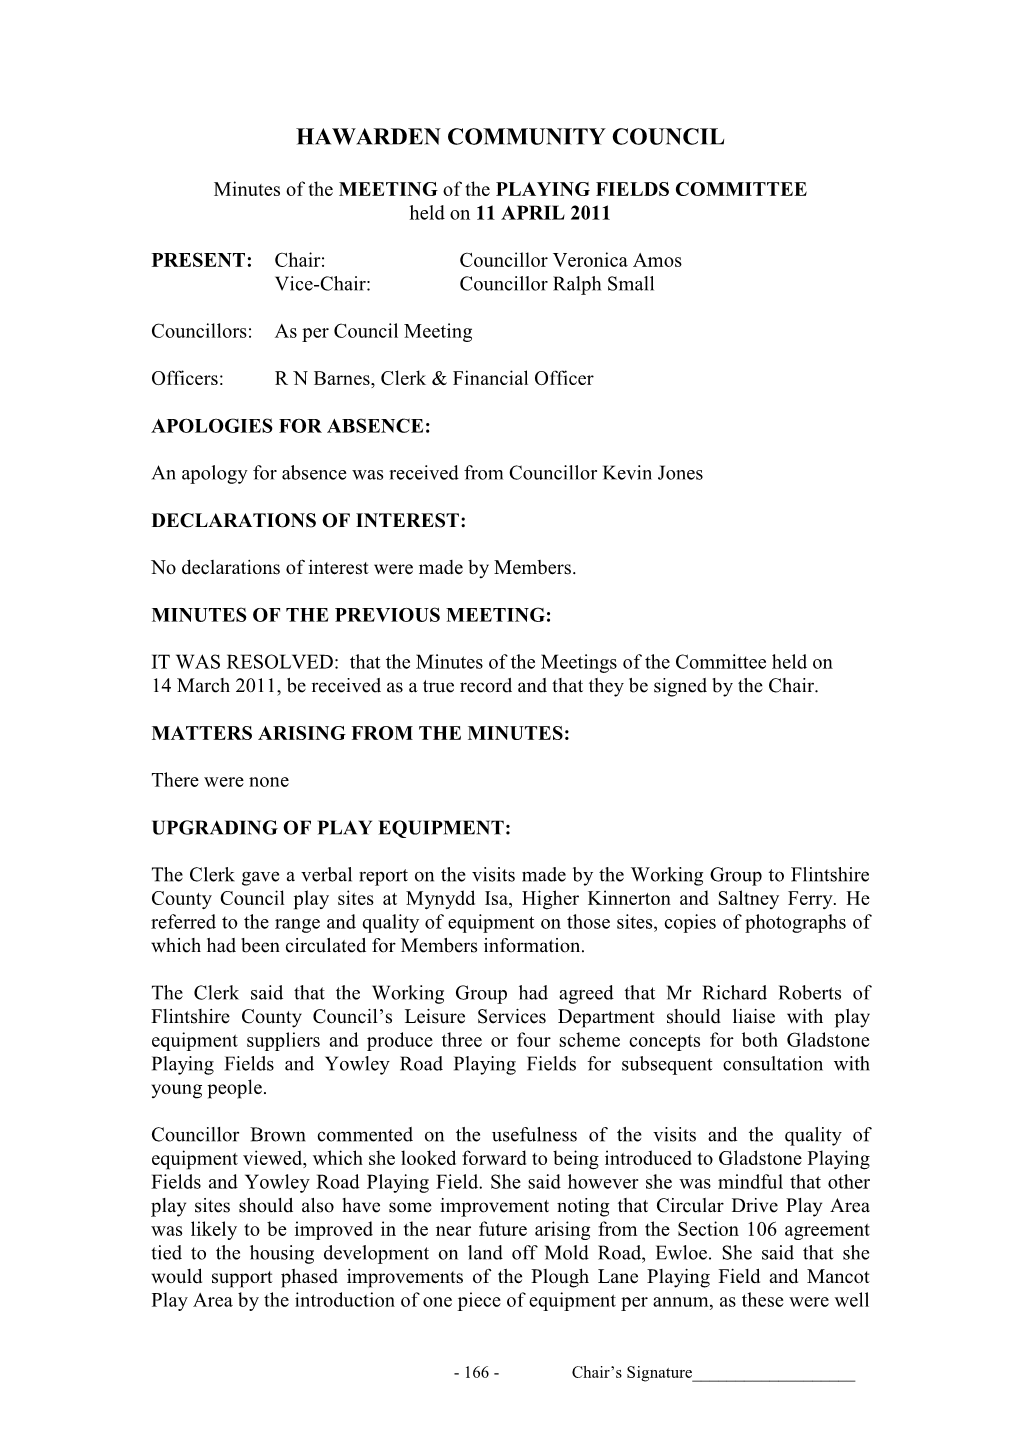 Minutes of the MEETING of the PLAYING FIELDS COMMITTEE Held on 11 APRIL 2011